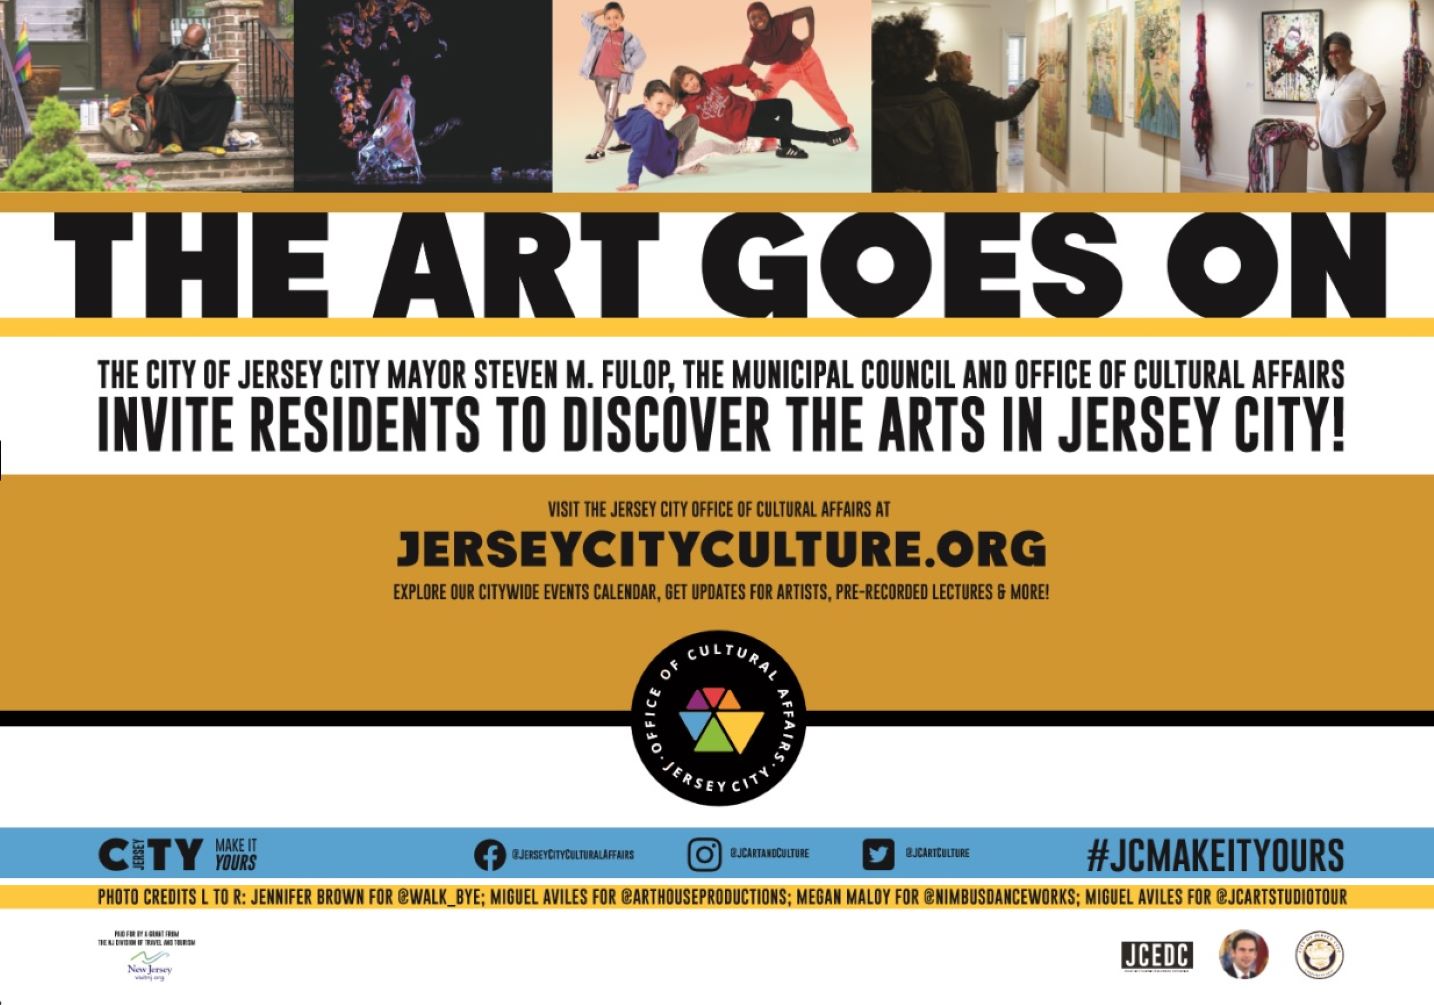 JERSEY CITY OFFICE OF CULTURAL AFFAIRS SALUTES OUR ARTS & CULTURE